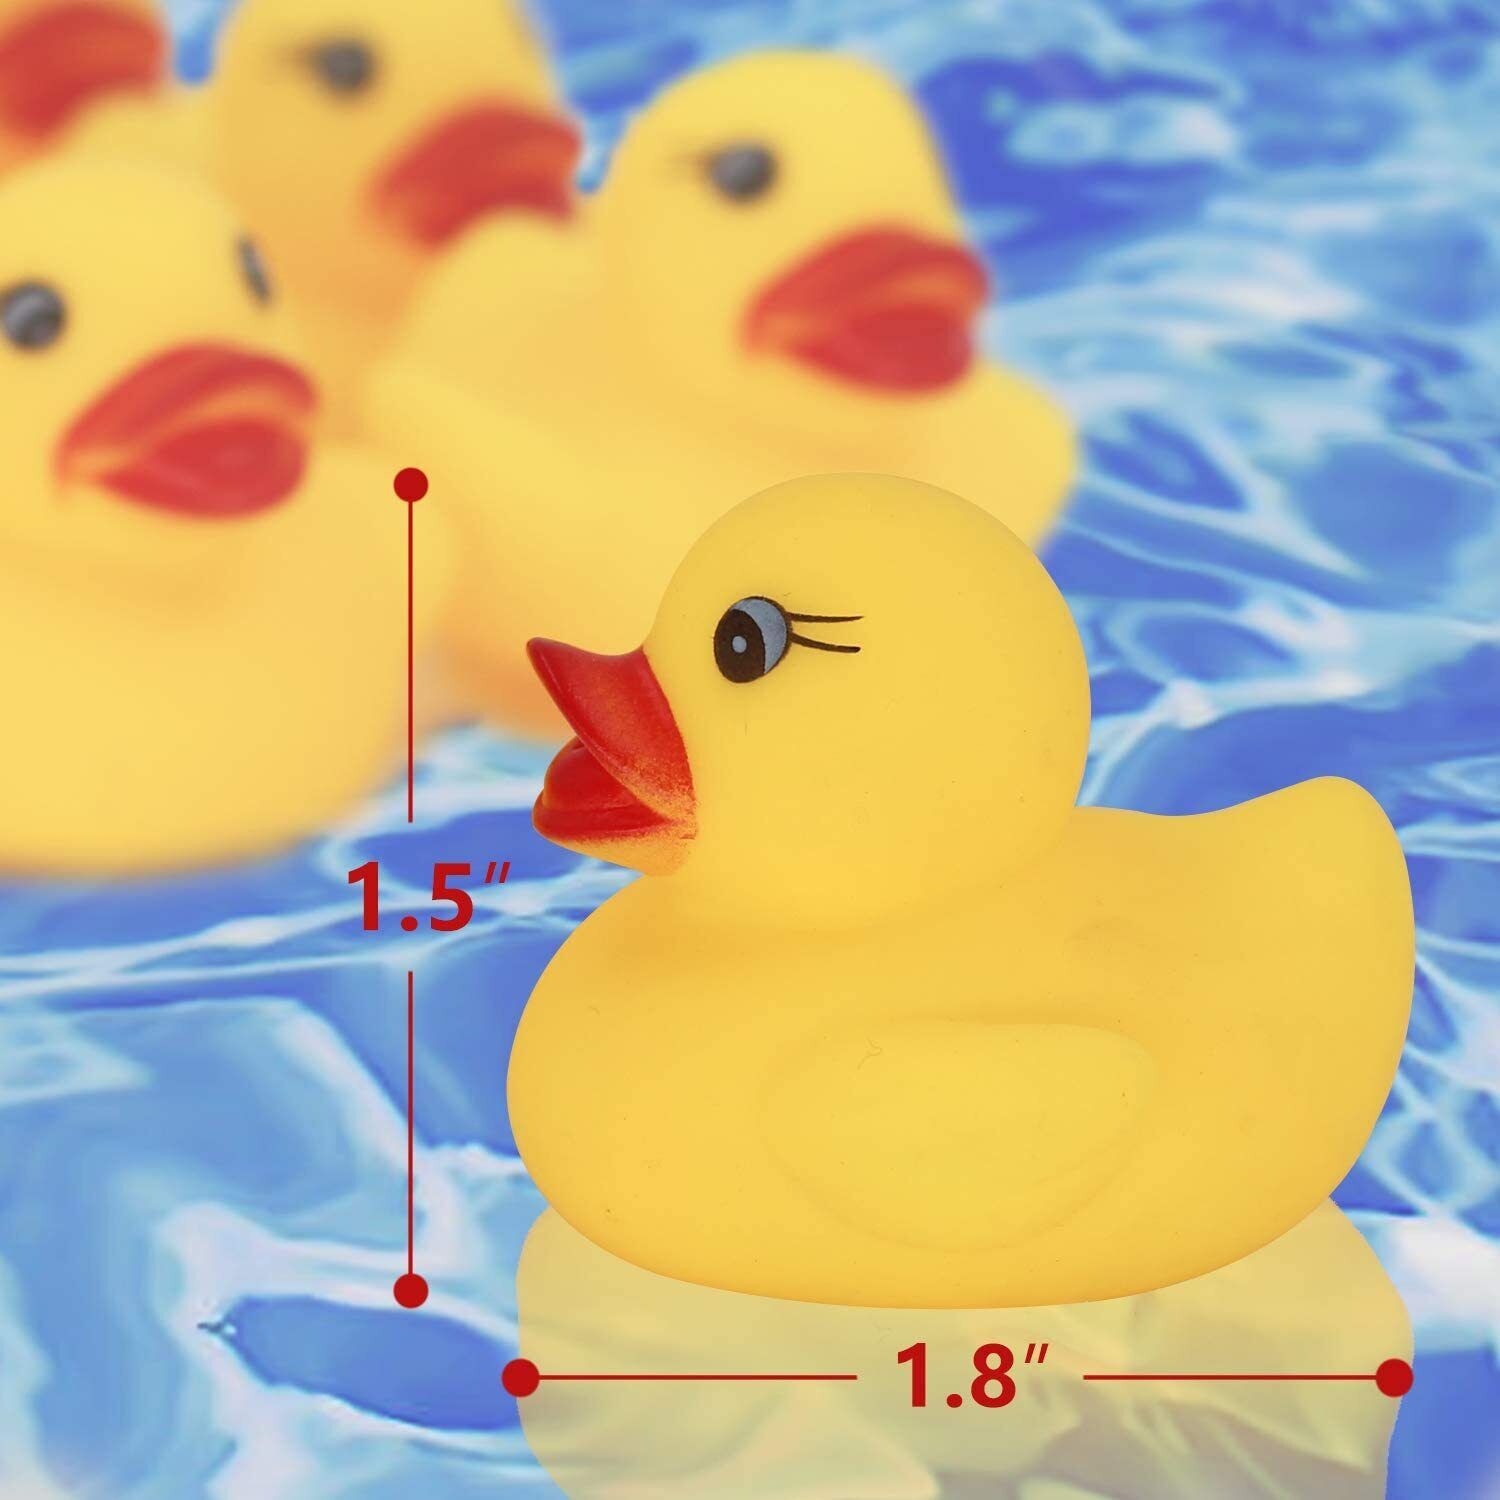 Novelty Place 12-48 Pcs Float Rubber Duck Ducky Baby Bath Toy for Kids Novelty Place Does Not Apply - фотография #3